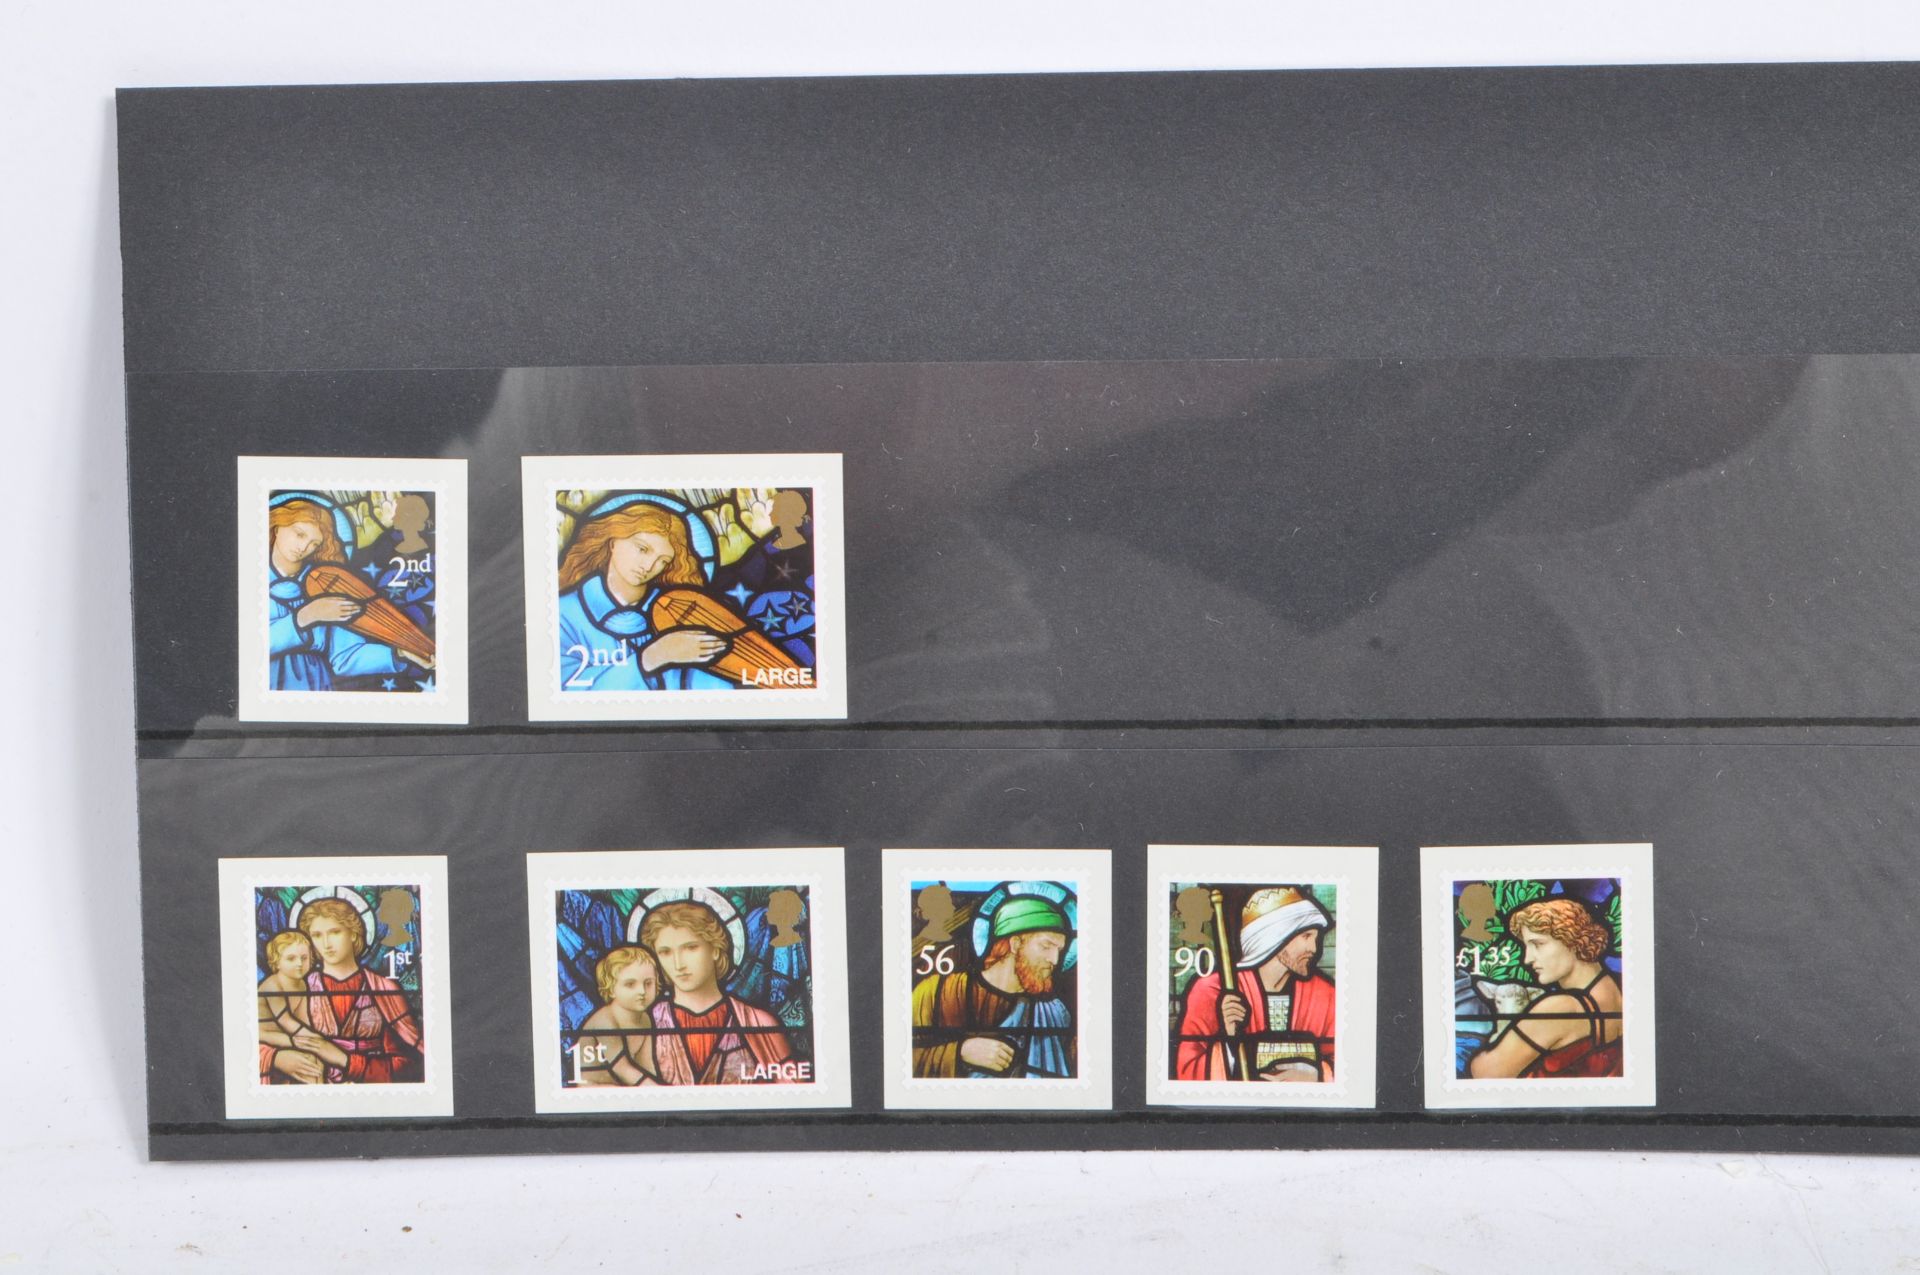 COLLECTION OF 21ST CENTURY BRITISH POSTAGE STAMPS - Image 3 of 7